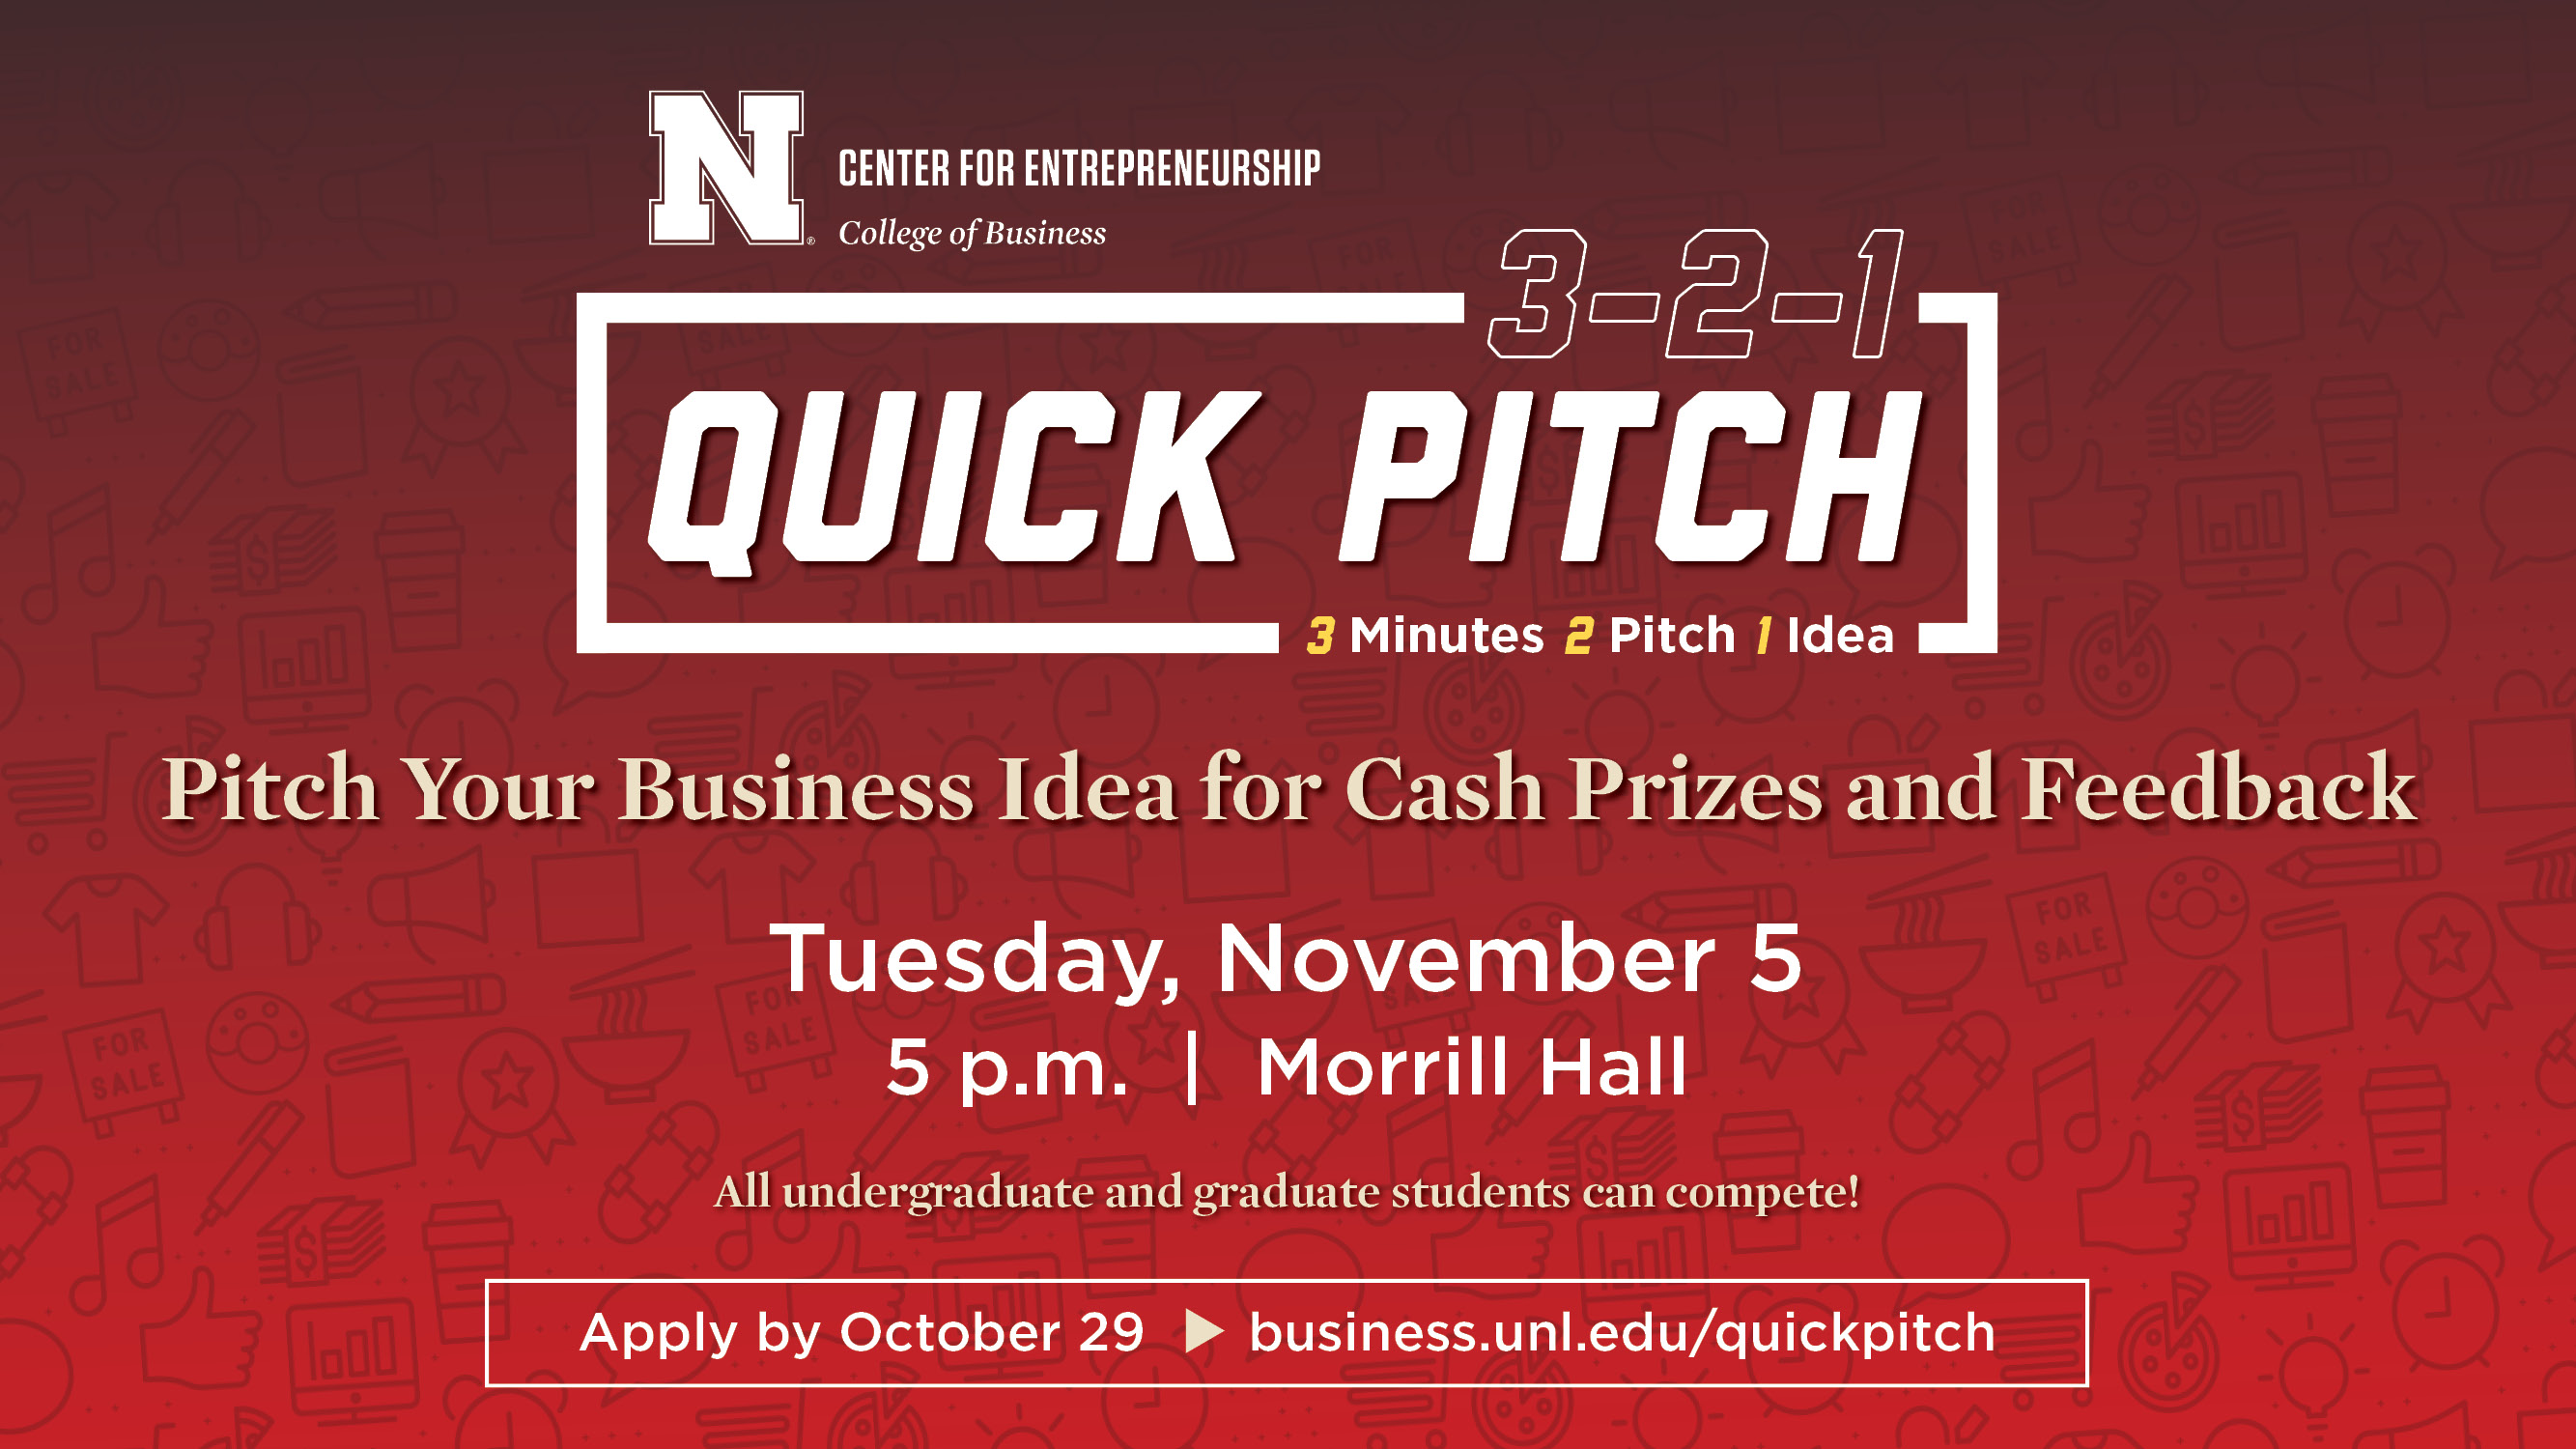 Apply now to compete in 3-2-1 Quick Pitch!